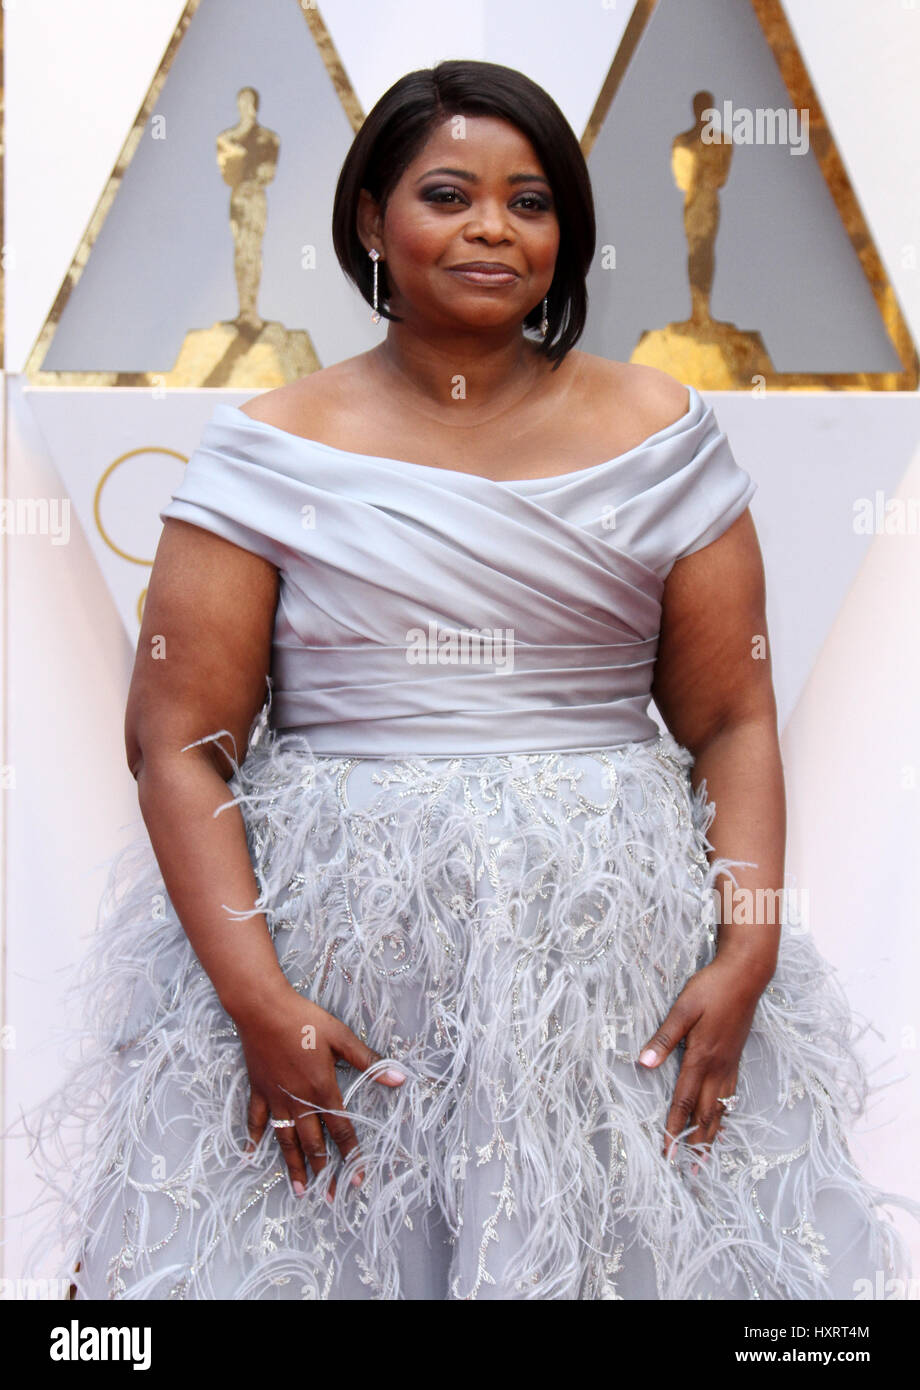 89th Annual Academy Awards held at the Dolby Theatre at the Hollywood & Highland Center  Featuring: Octavia Spencer Where: Los Angeles, California, United States When: 26 Feb 2017 Stock Photo